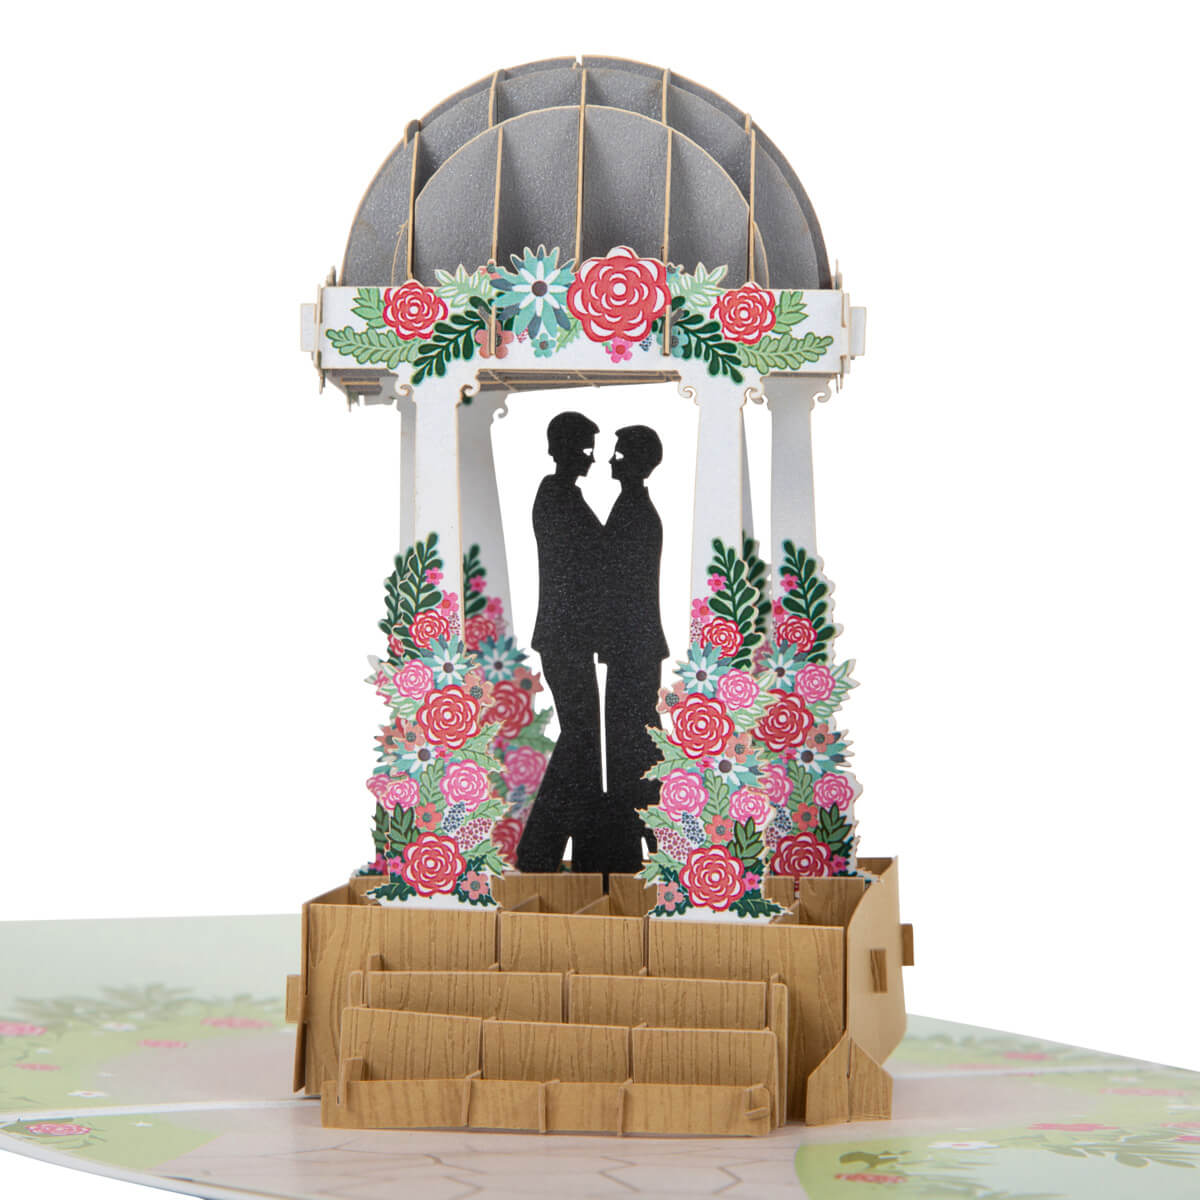 Mr and Mr Wedding Pop Up Card - Close Up Image of 2 grooms under a pop up pagoda